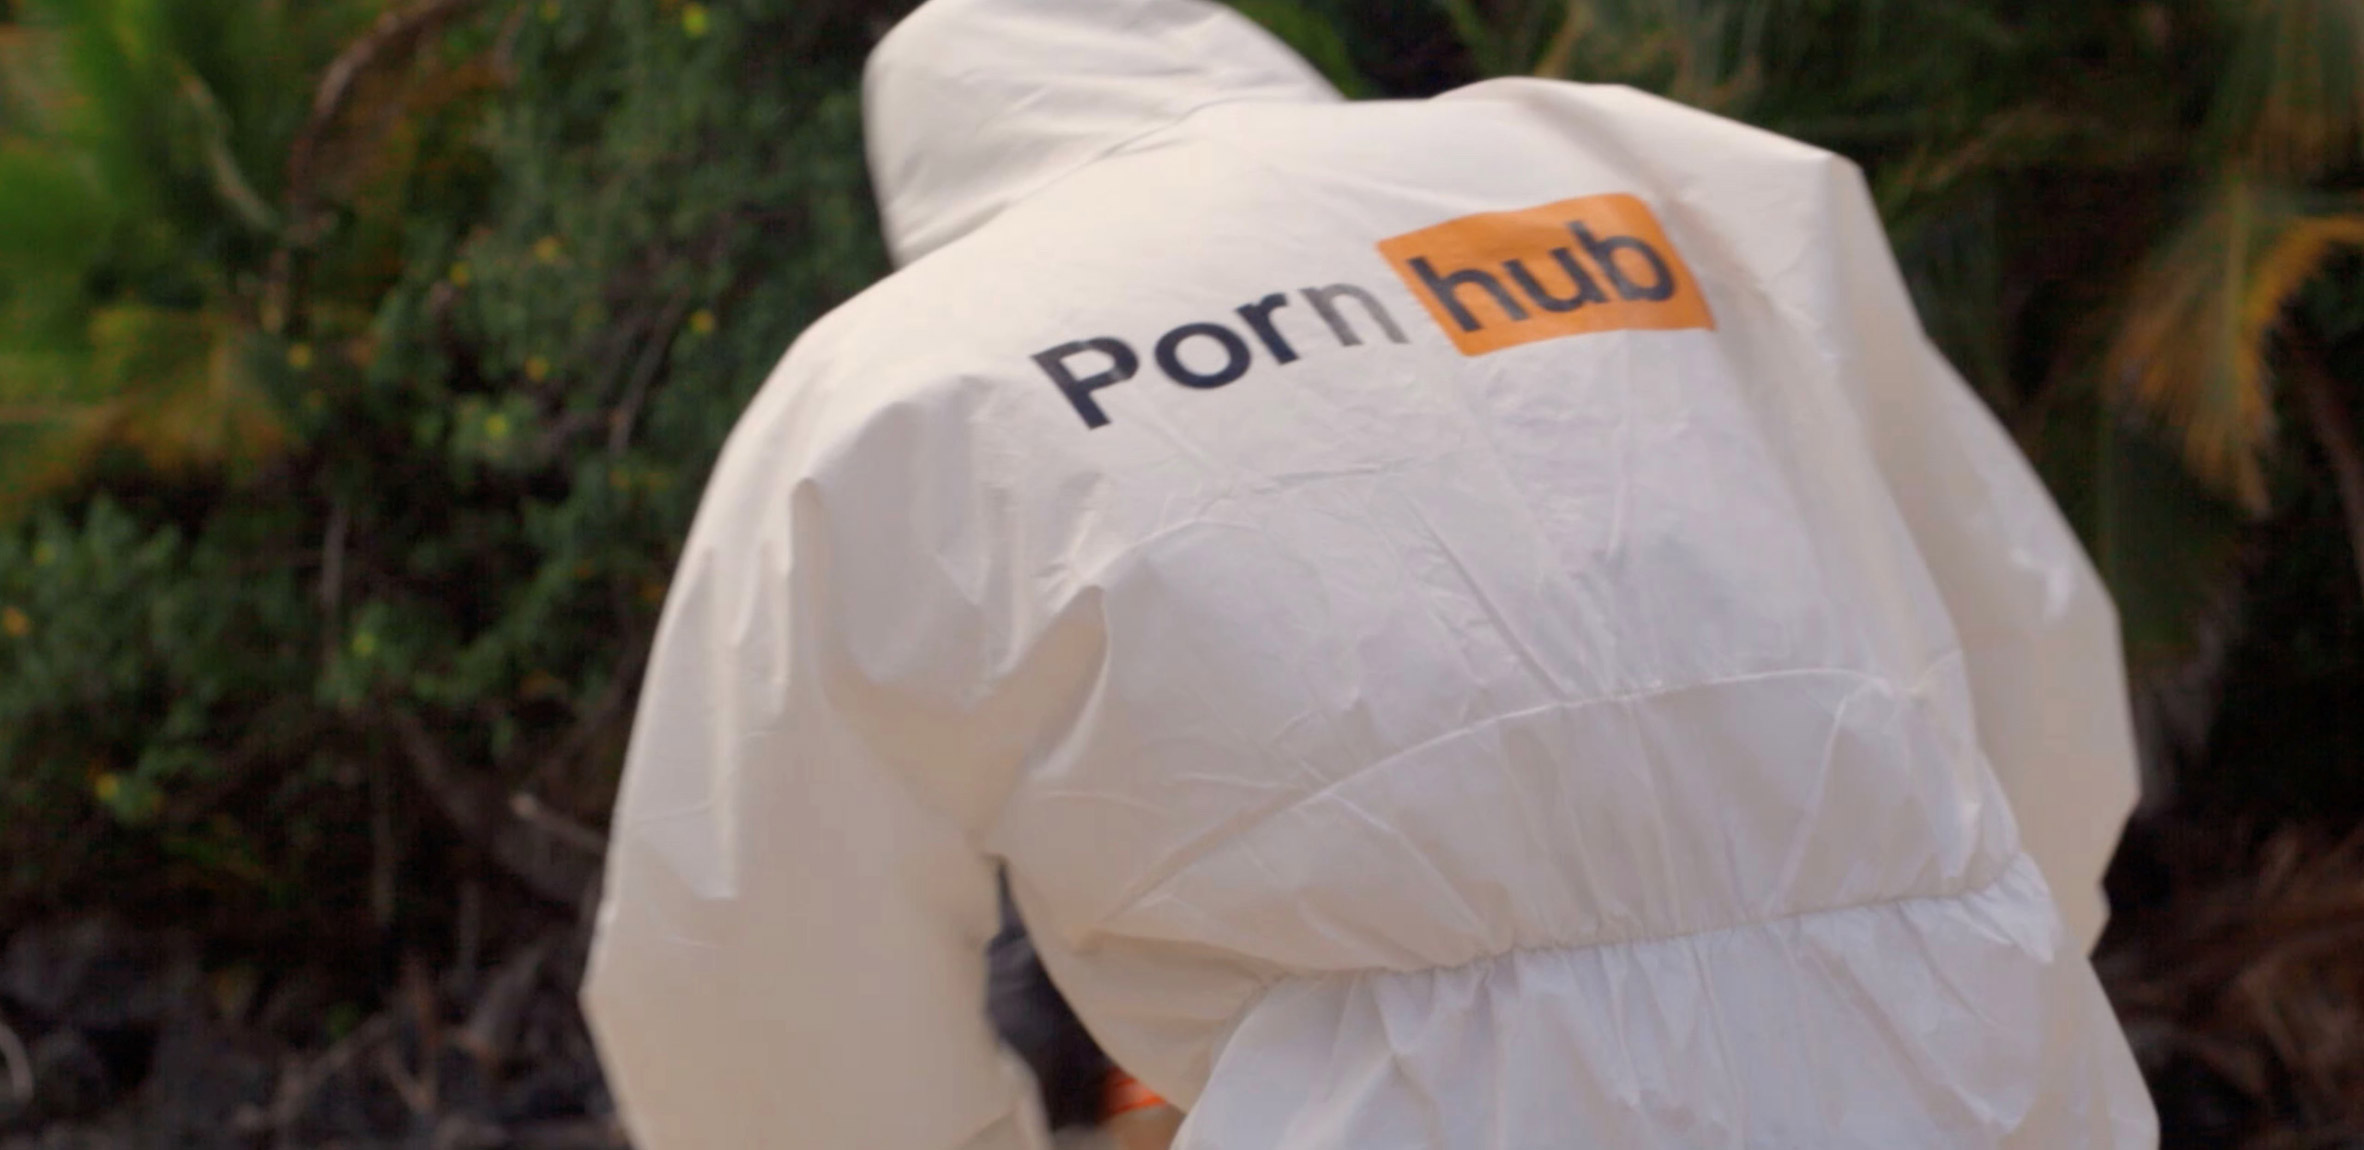 Dirtiest Porn Ever by Pornhub aims to raise Monet to remove plastic from oceans